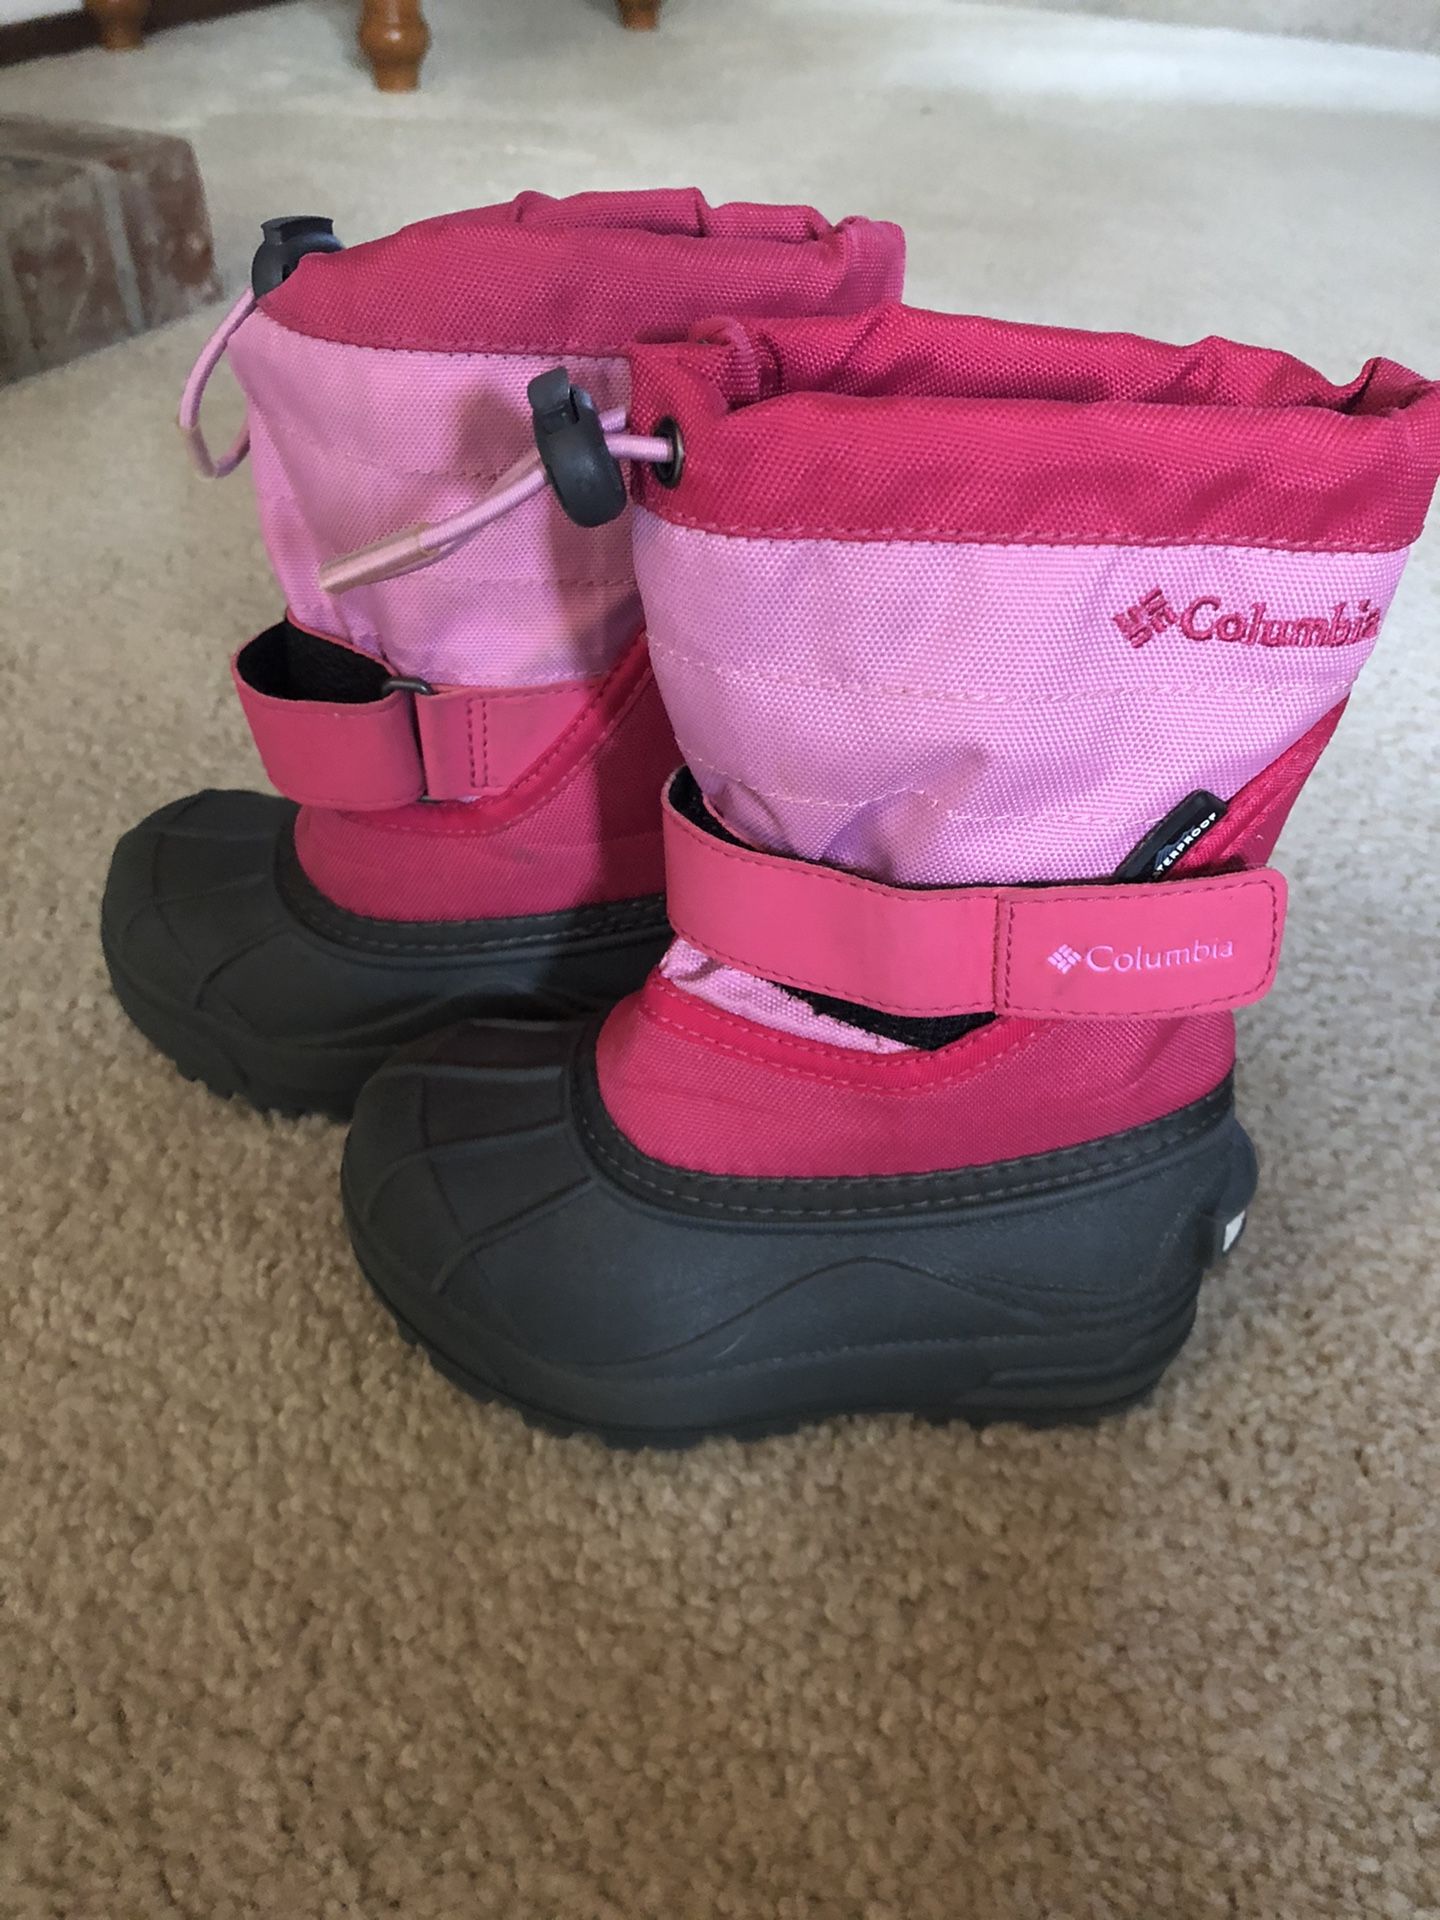 Columbia Girls Snow Boots - Size 8